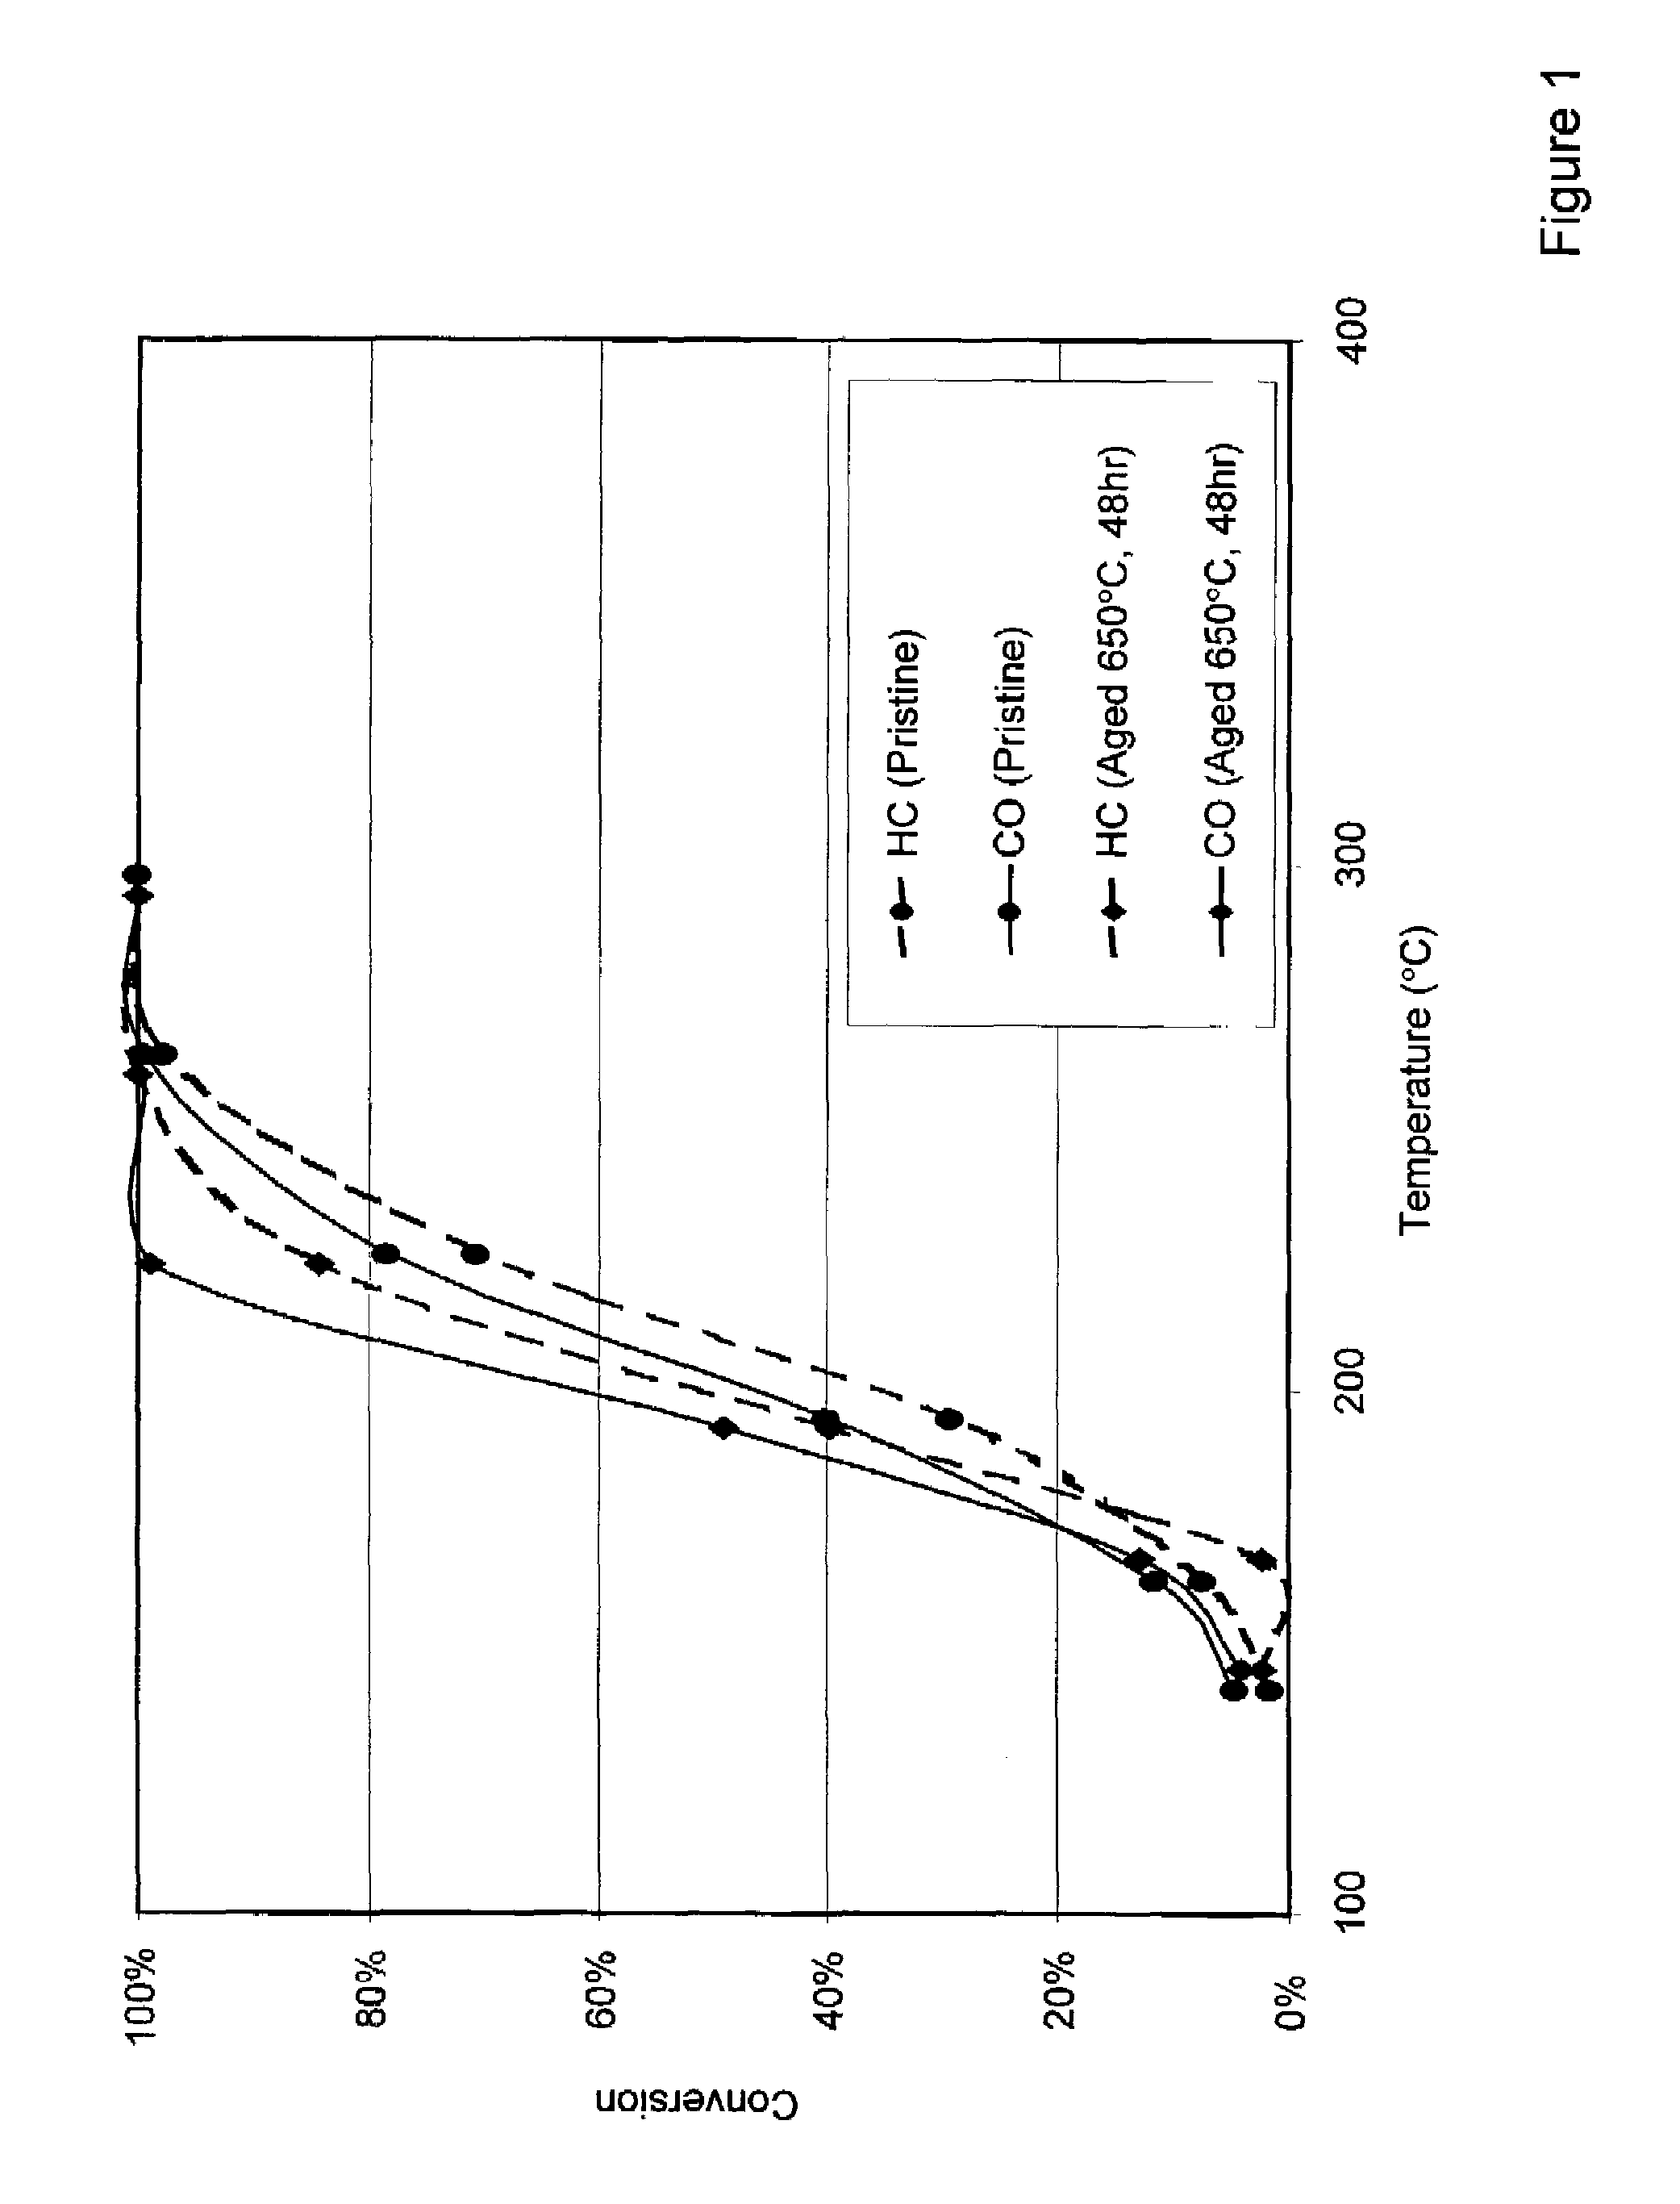 Catalyzed diesel particulate matter filter with improved thermal stability